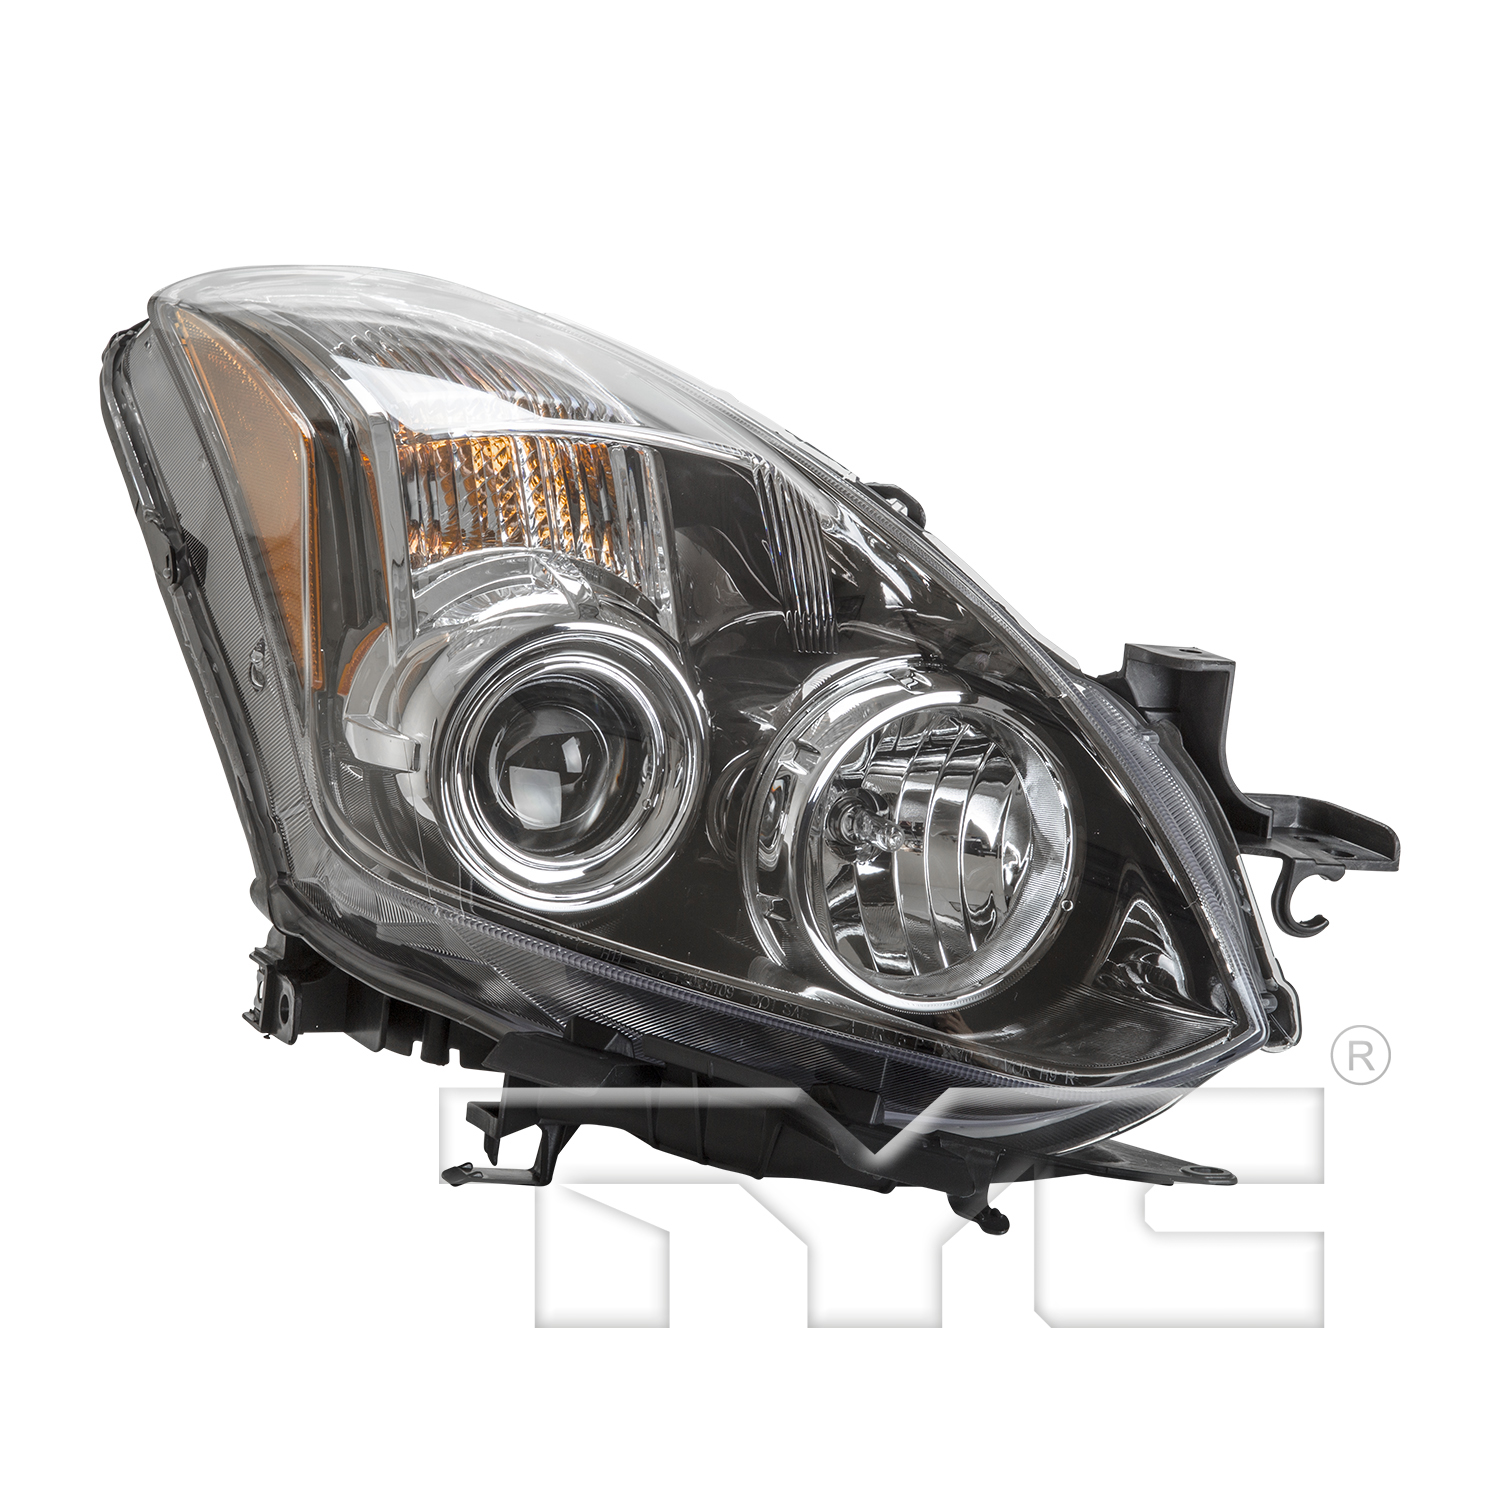 Aftermarket HEADLIGHTS for NISSAN - ALTIMA, ALTIMA,10-13,RT Headlamp assy composite